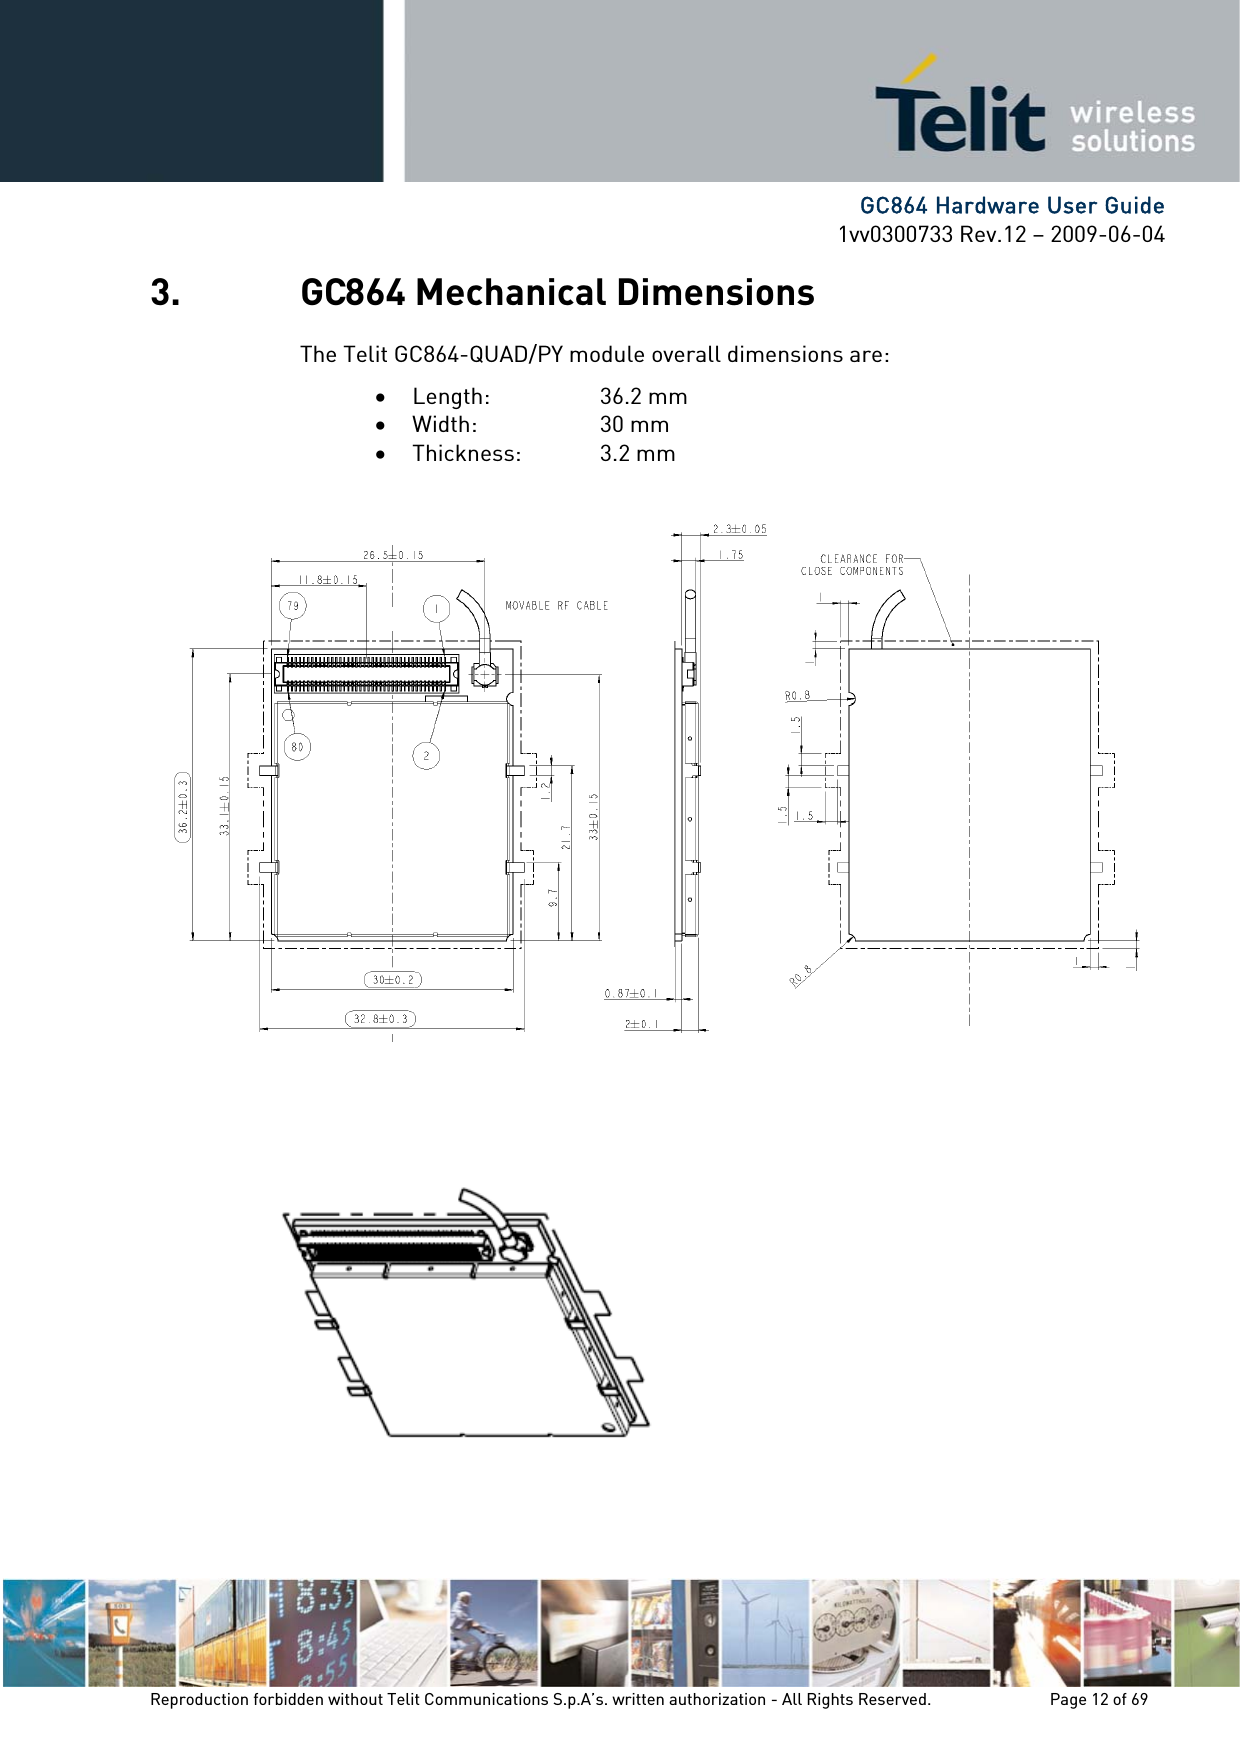      GC864 Hardware User Guide 1vv0300733 Rev.12 – 2009-06-04 3. GC864 Mechanical Dimensions The Telit GC864-QUAD/PY module overall dimensions are: • Length:   36.2 mm • Width:   30 mm • Thickness:   3.2 mm    Reproduction forbidden without Telit Communications S.p.A’s. written authorization - All Rights Reserved.    Page 12 of 69  